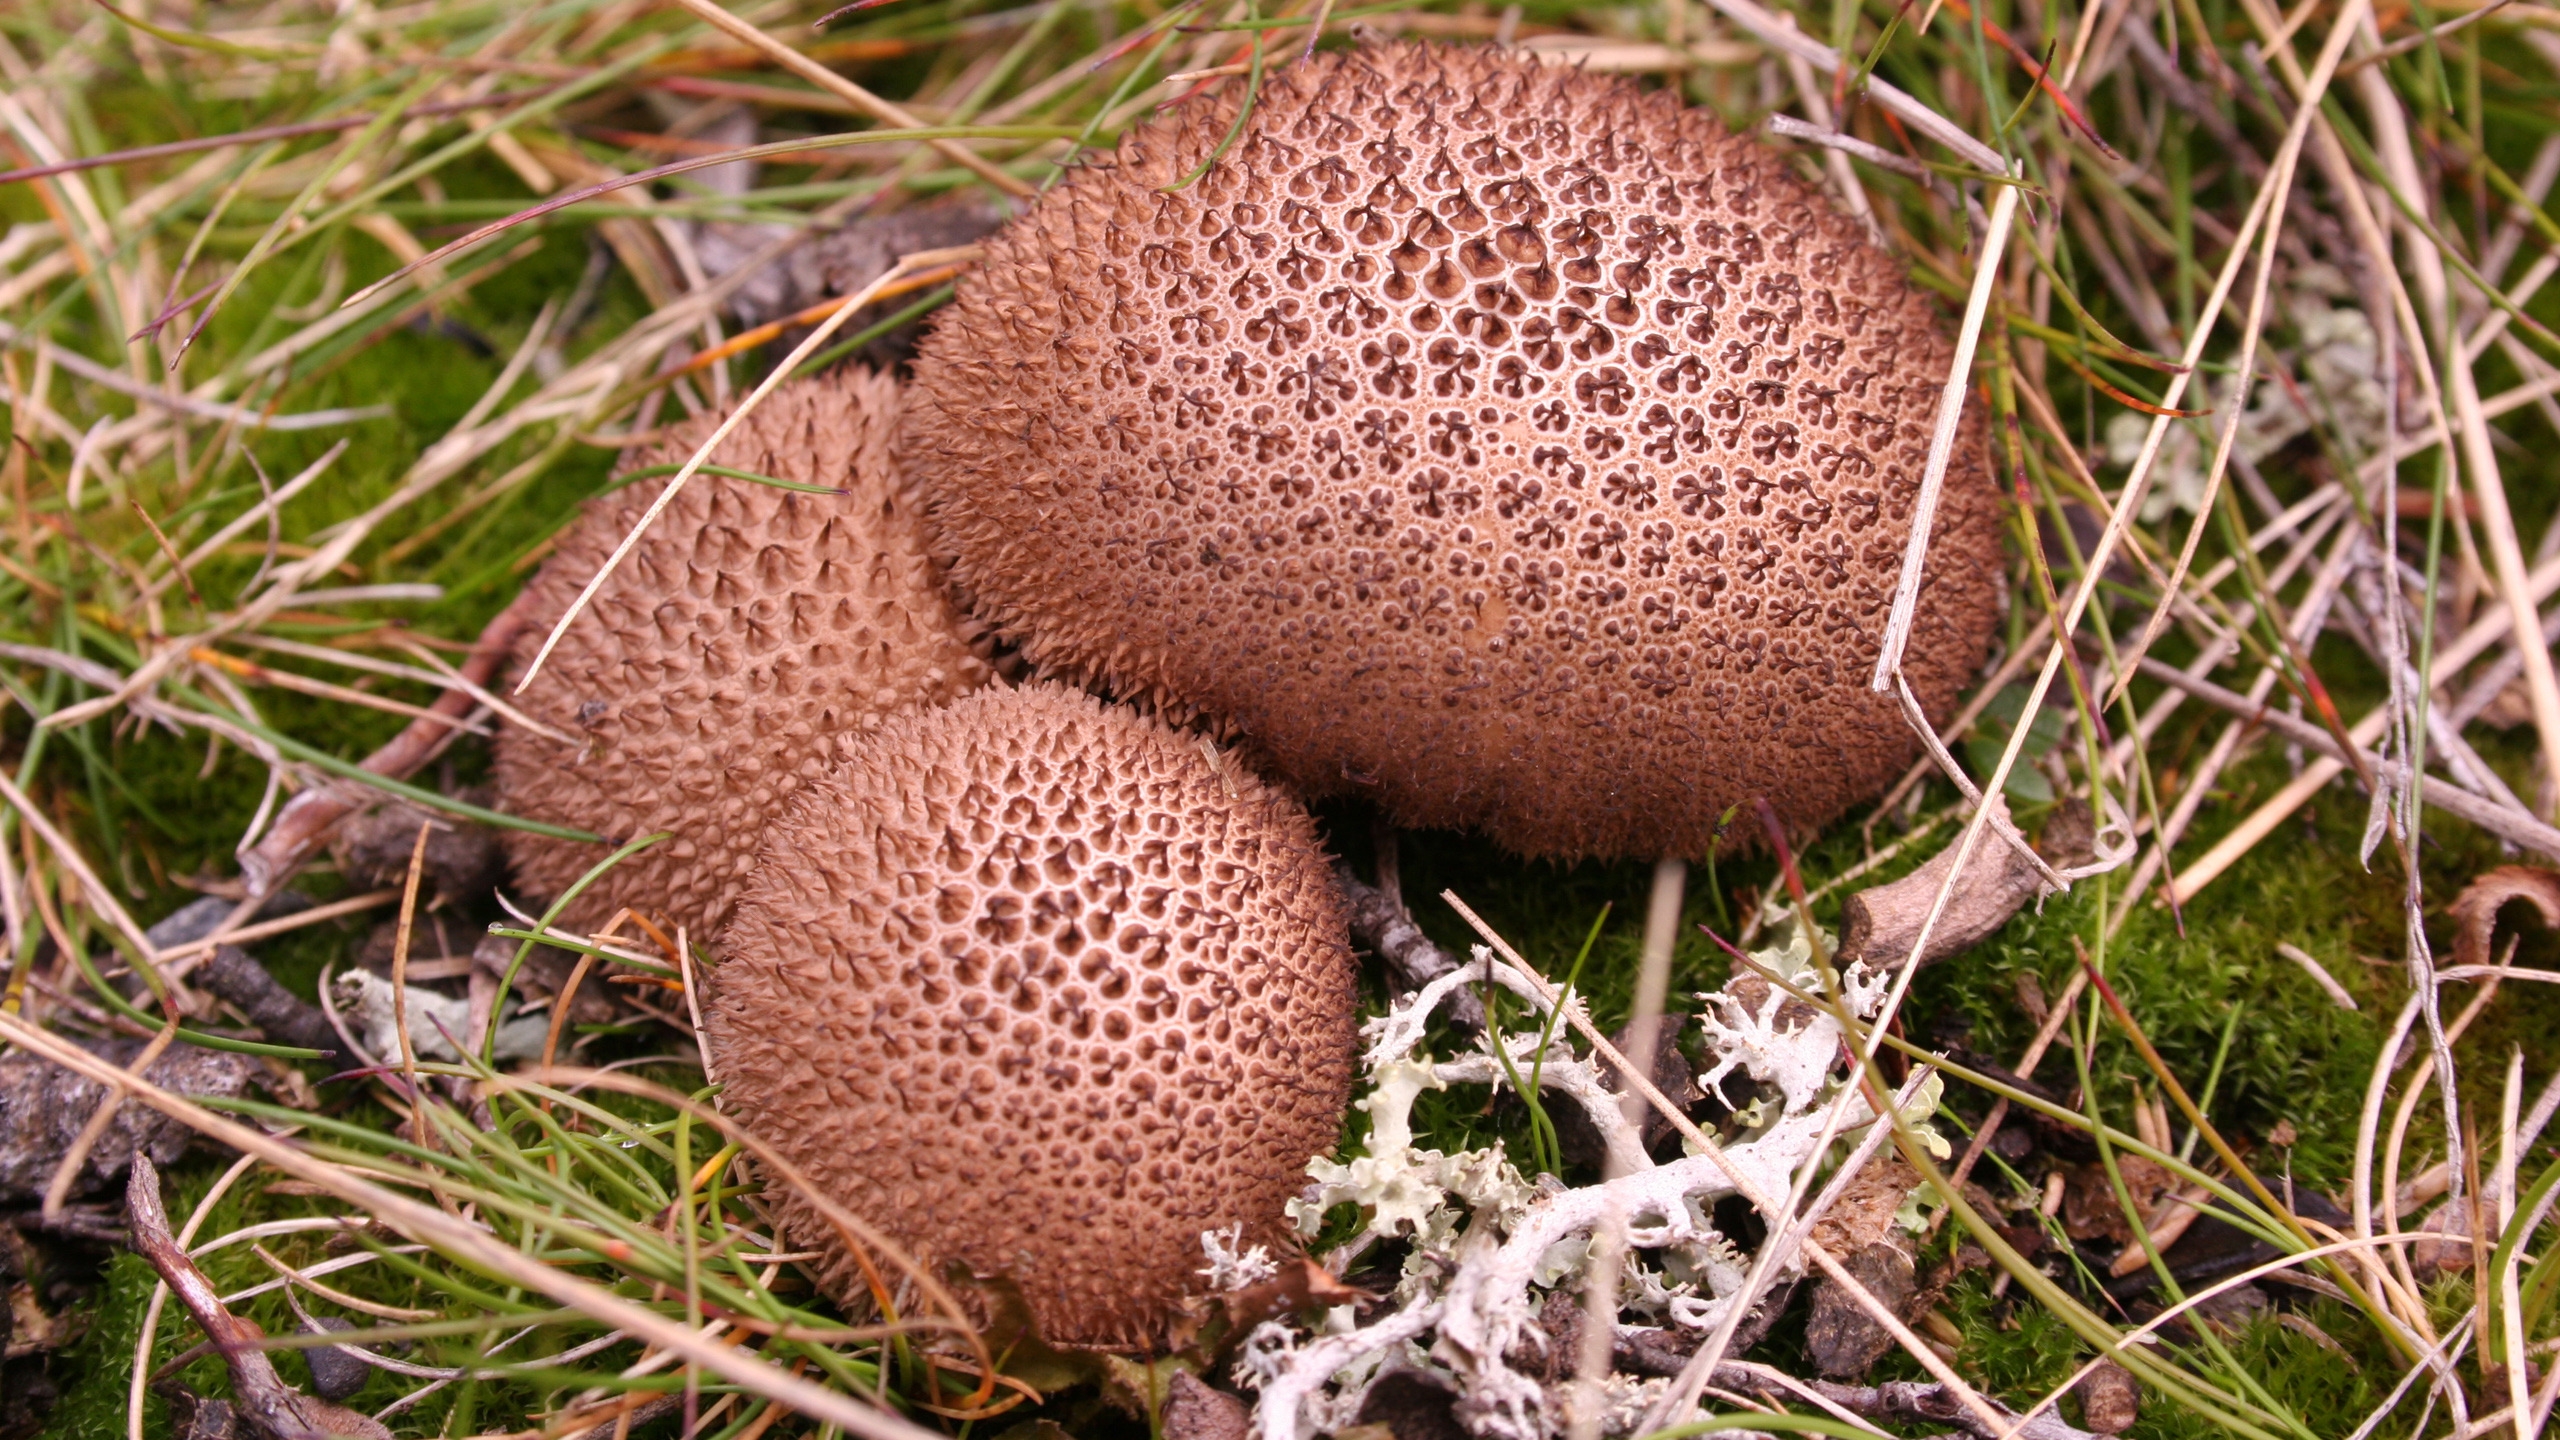 Umber brown puffball for 2560x1440 HDTV resolution